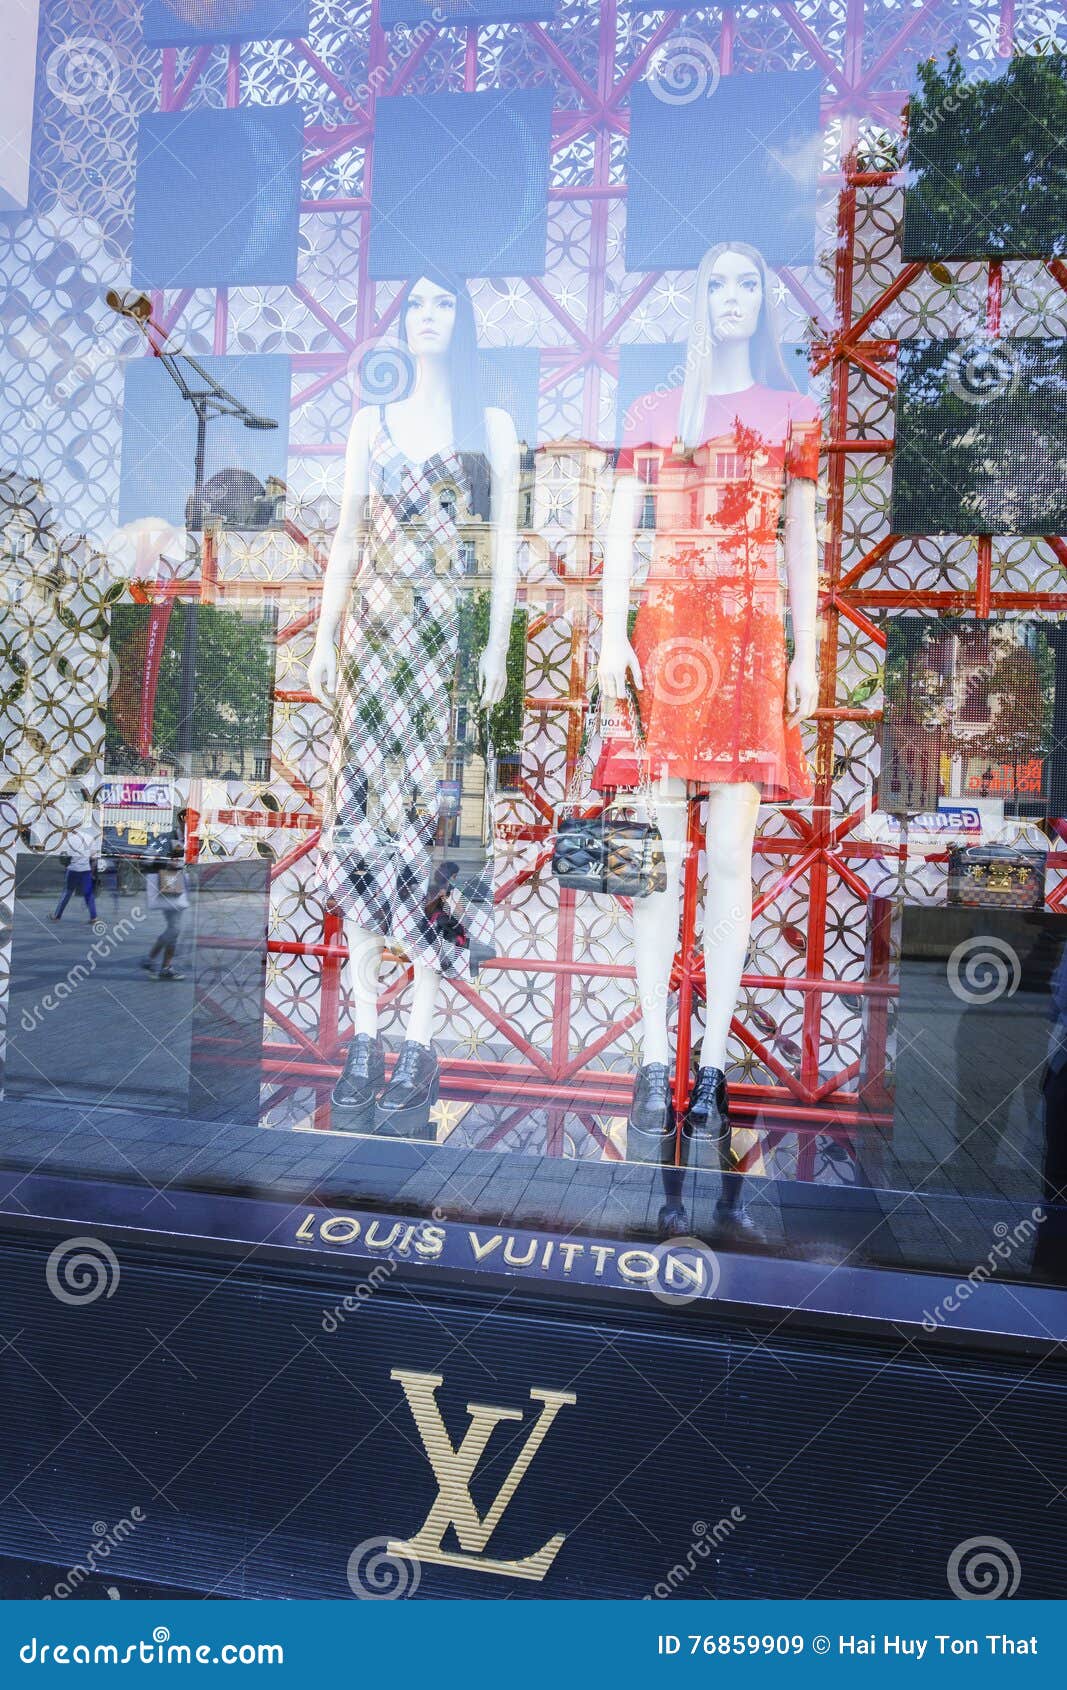 Louis vuitton shop window hi-res stock photography and images - Alamy